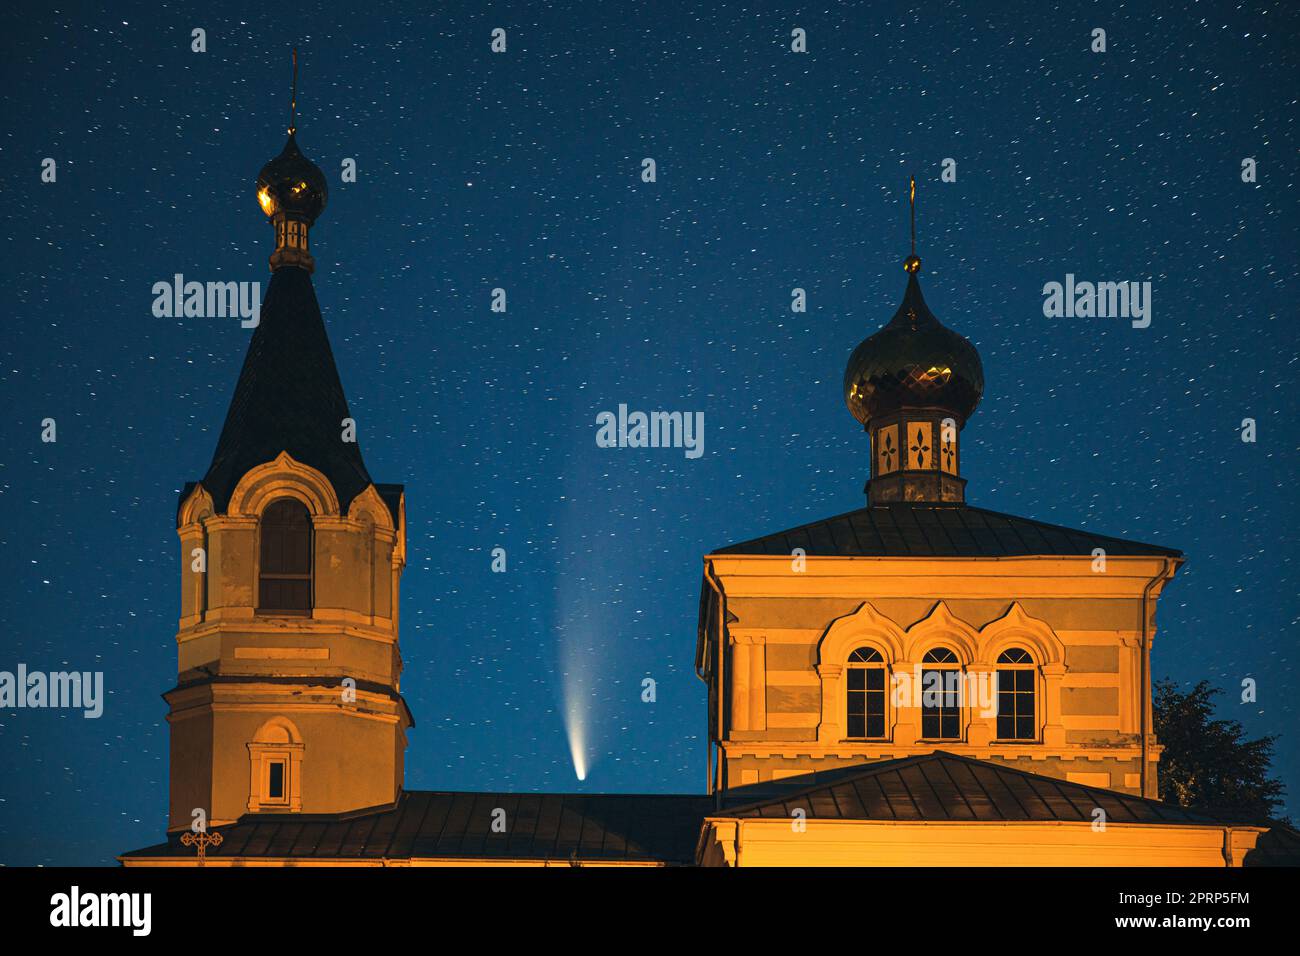 Korma Village, Dobrush District, Belarus. Comet Neowise C2020f3 In Night Starry Sky Above St. John The Korma Convent Church In Korma Village. Famous Orthodox Church And Historic Heritage Stock Photo